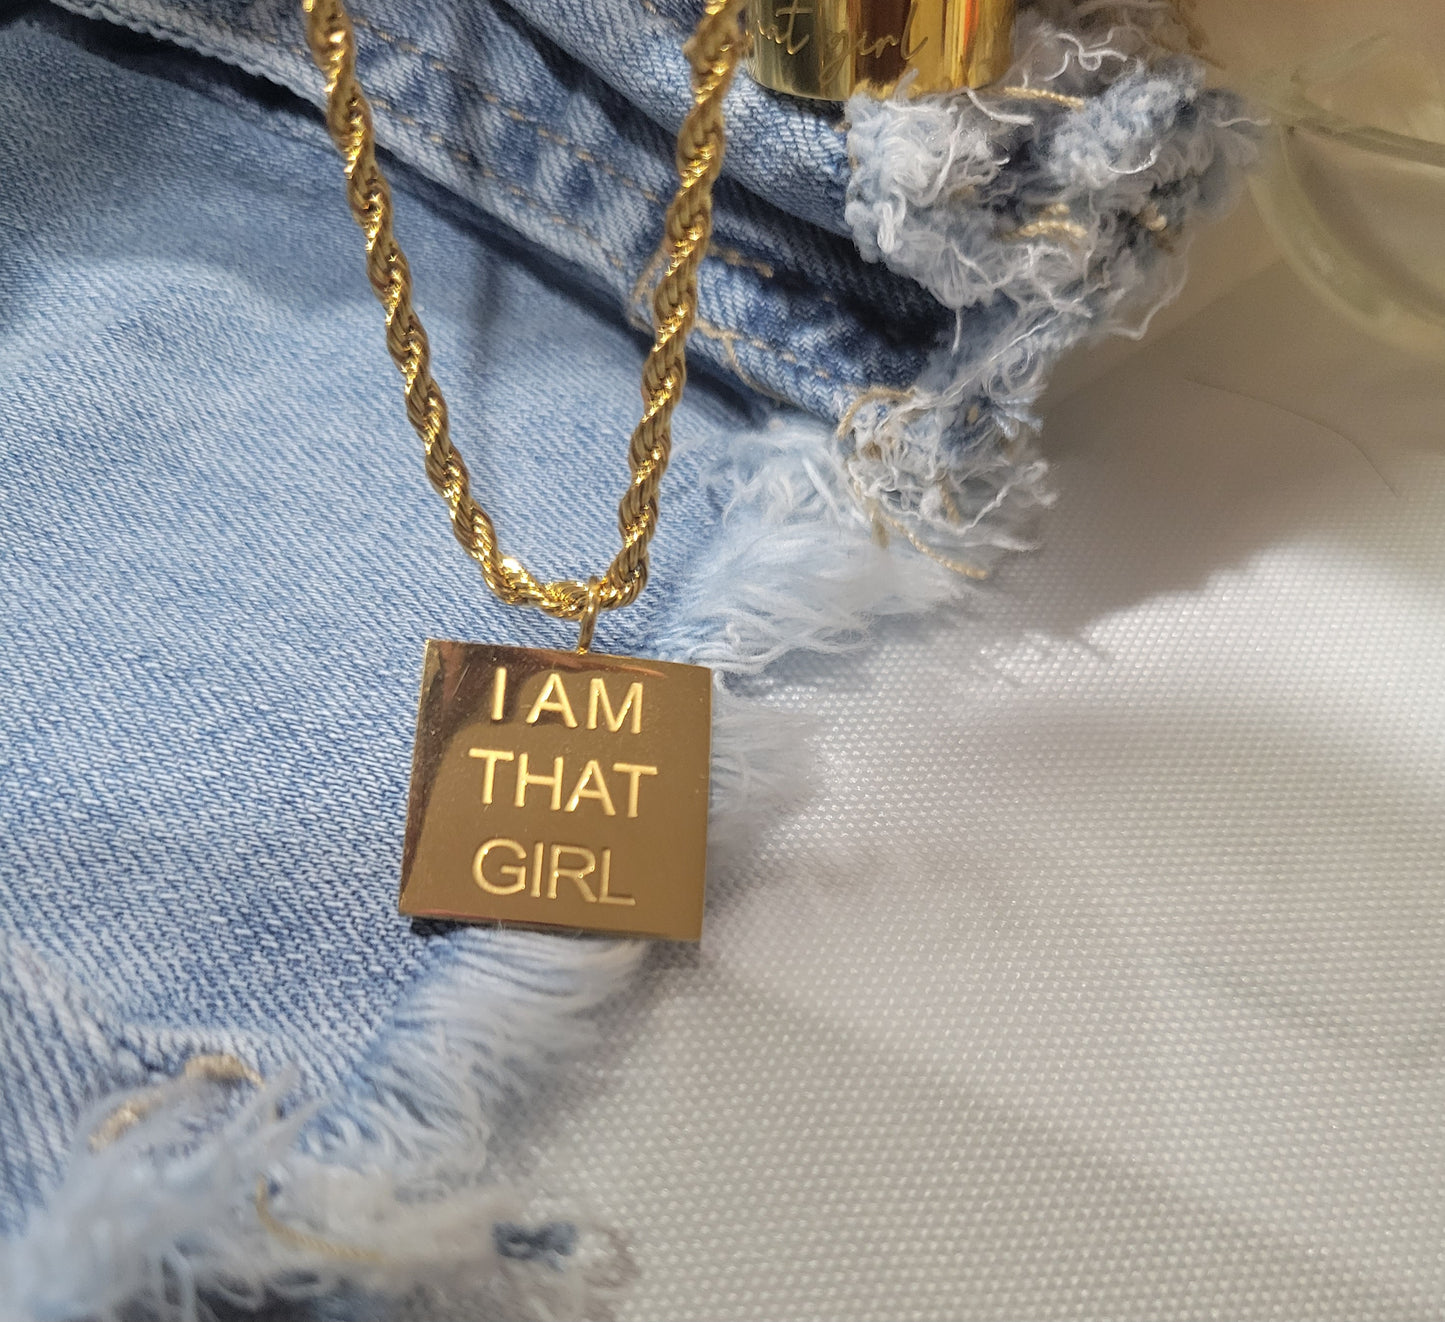 "I AM THAT GIRL" INSPIRATIONAL NECKLACE